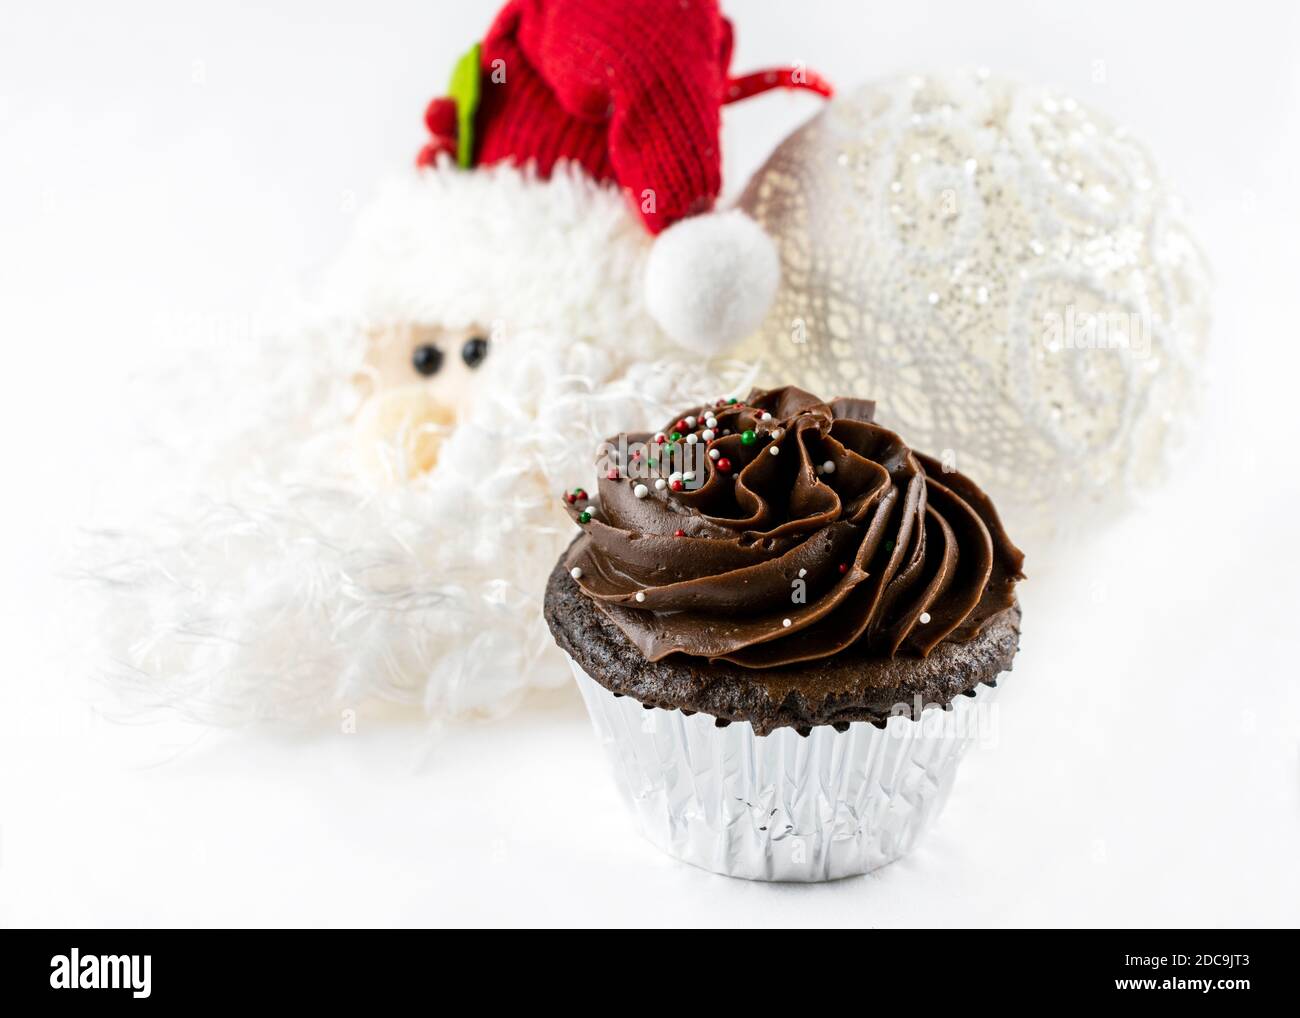 A close up shot of a Christmas chocolate cupcake with small candy sprinkles of red, green and white.  Santa and ball ornaments blurred in background. Stock Photo